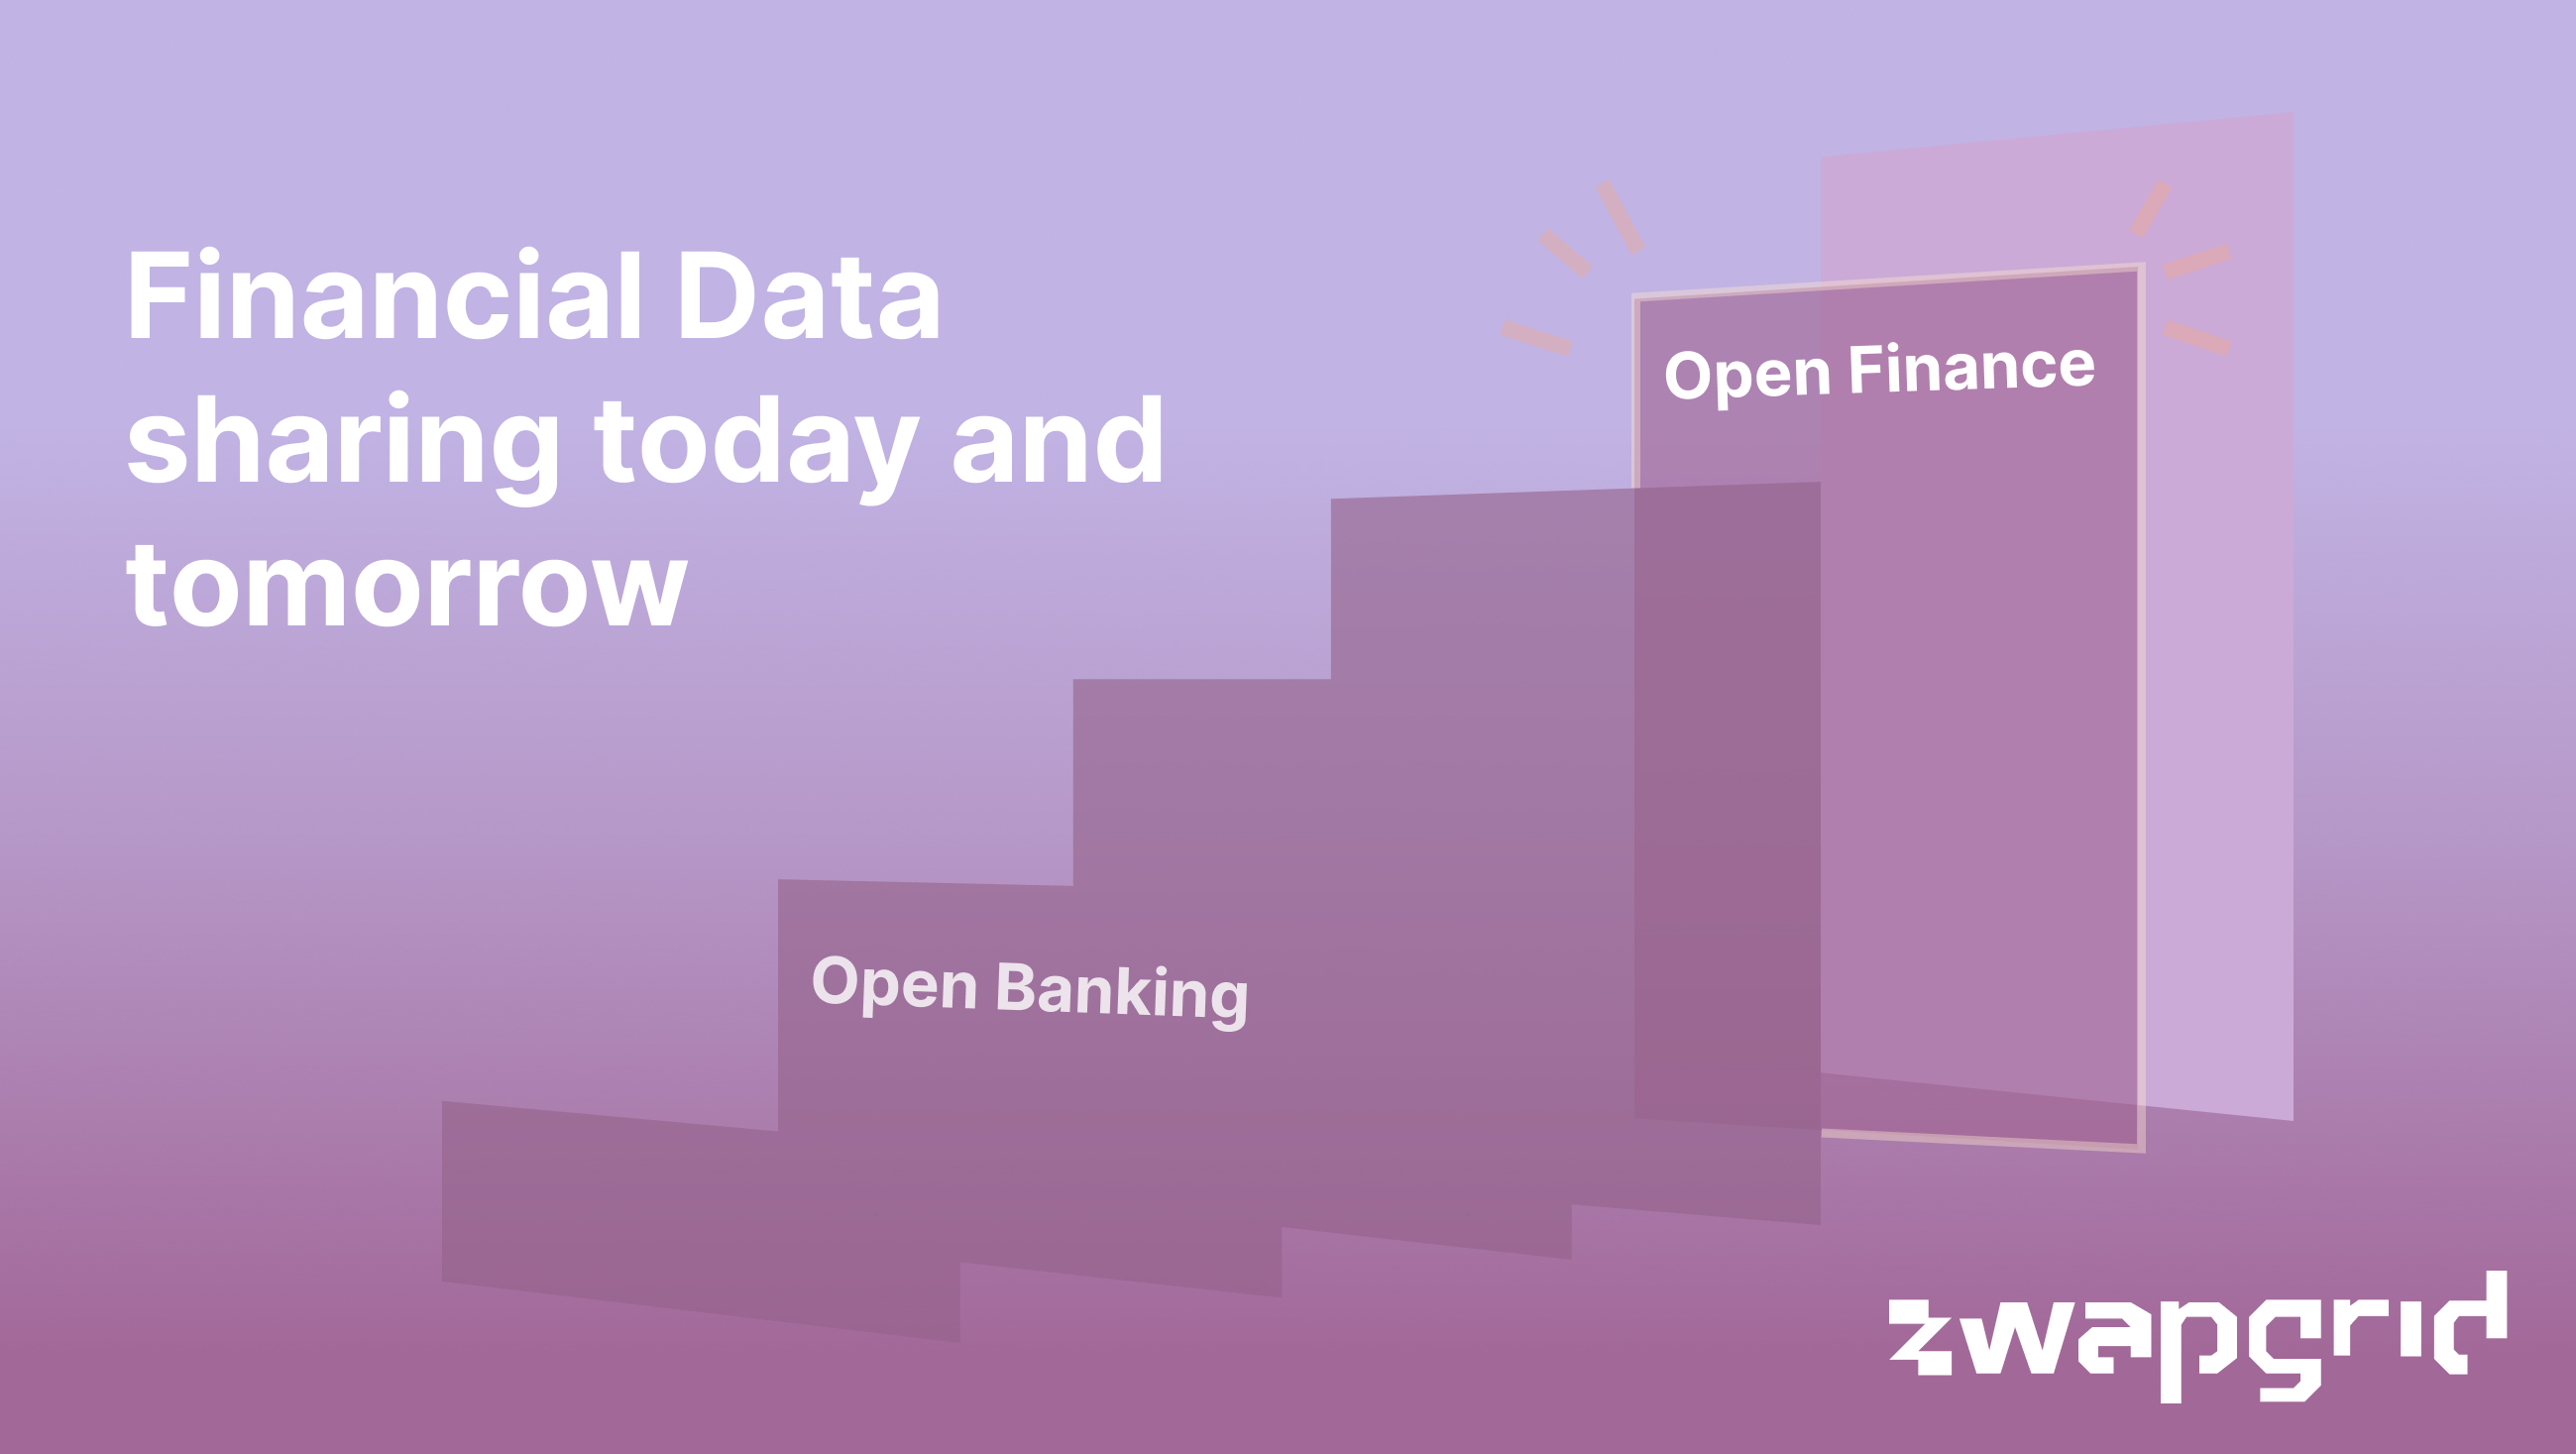 Open finance - financial data now and tomorrow